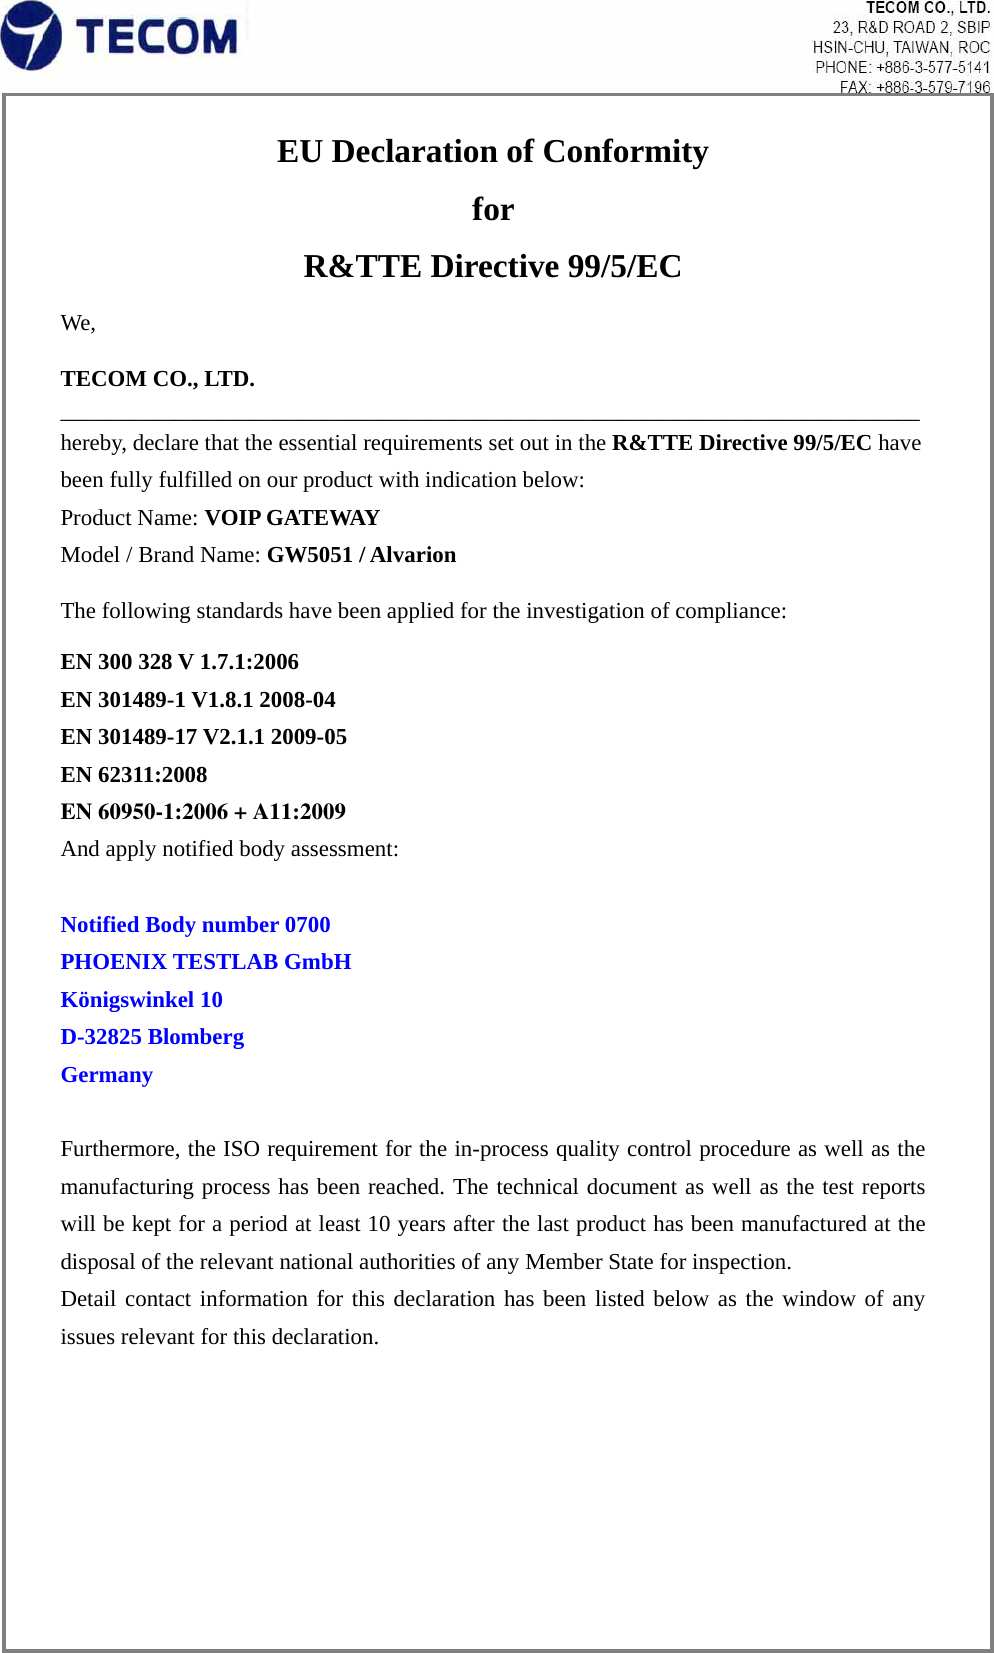 EU Declaration of Conformity   for  R&amp;TTE Directive 99/5/EC We,  TECOM CO., LTD. ___________________________________________________________________________ hereby, declare that the essential requirements set out in the R&amp;TTE Directive 99/5/EC have been fully fulfilled on our product with indication below: Product Name: VOIP GATEWAY Model / Brand Name: GW5051 / Alvarion  The following standards have been applied for the investigation of compliance: EN 300 328 V 1.7.1:2006 EN 301489-1 V1.8.1 2008-04 EN 301489-17 V2.1.1 2009-05 EN 62311:2008EN 60950-1:2006 + A11:2009 And apply notified body assessment:  Notified Body number 0700 PHOENIX TESTLAB GmbH Königswinkel 10 D-32825 Blomberg   Germany  Furthermore, the ISO requirement for the in-process quality control procedure as well as the manufacturing process has been reached. The technical document as well as the test reports will be kept for a period at least 10 years after the last product has been manufactured at the disposal of the relevant national authorities of any Member State for inspection.   Detail contact information for this declaration has been listed below as the window of any issues relevant for this declaration. 